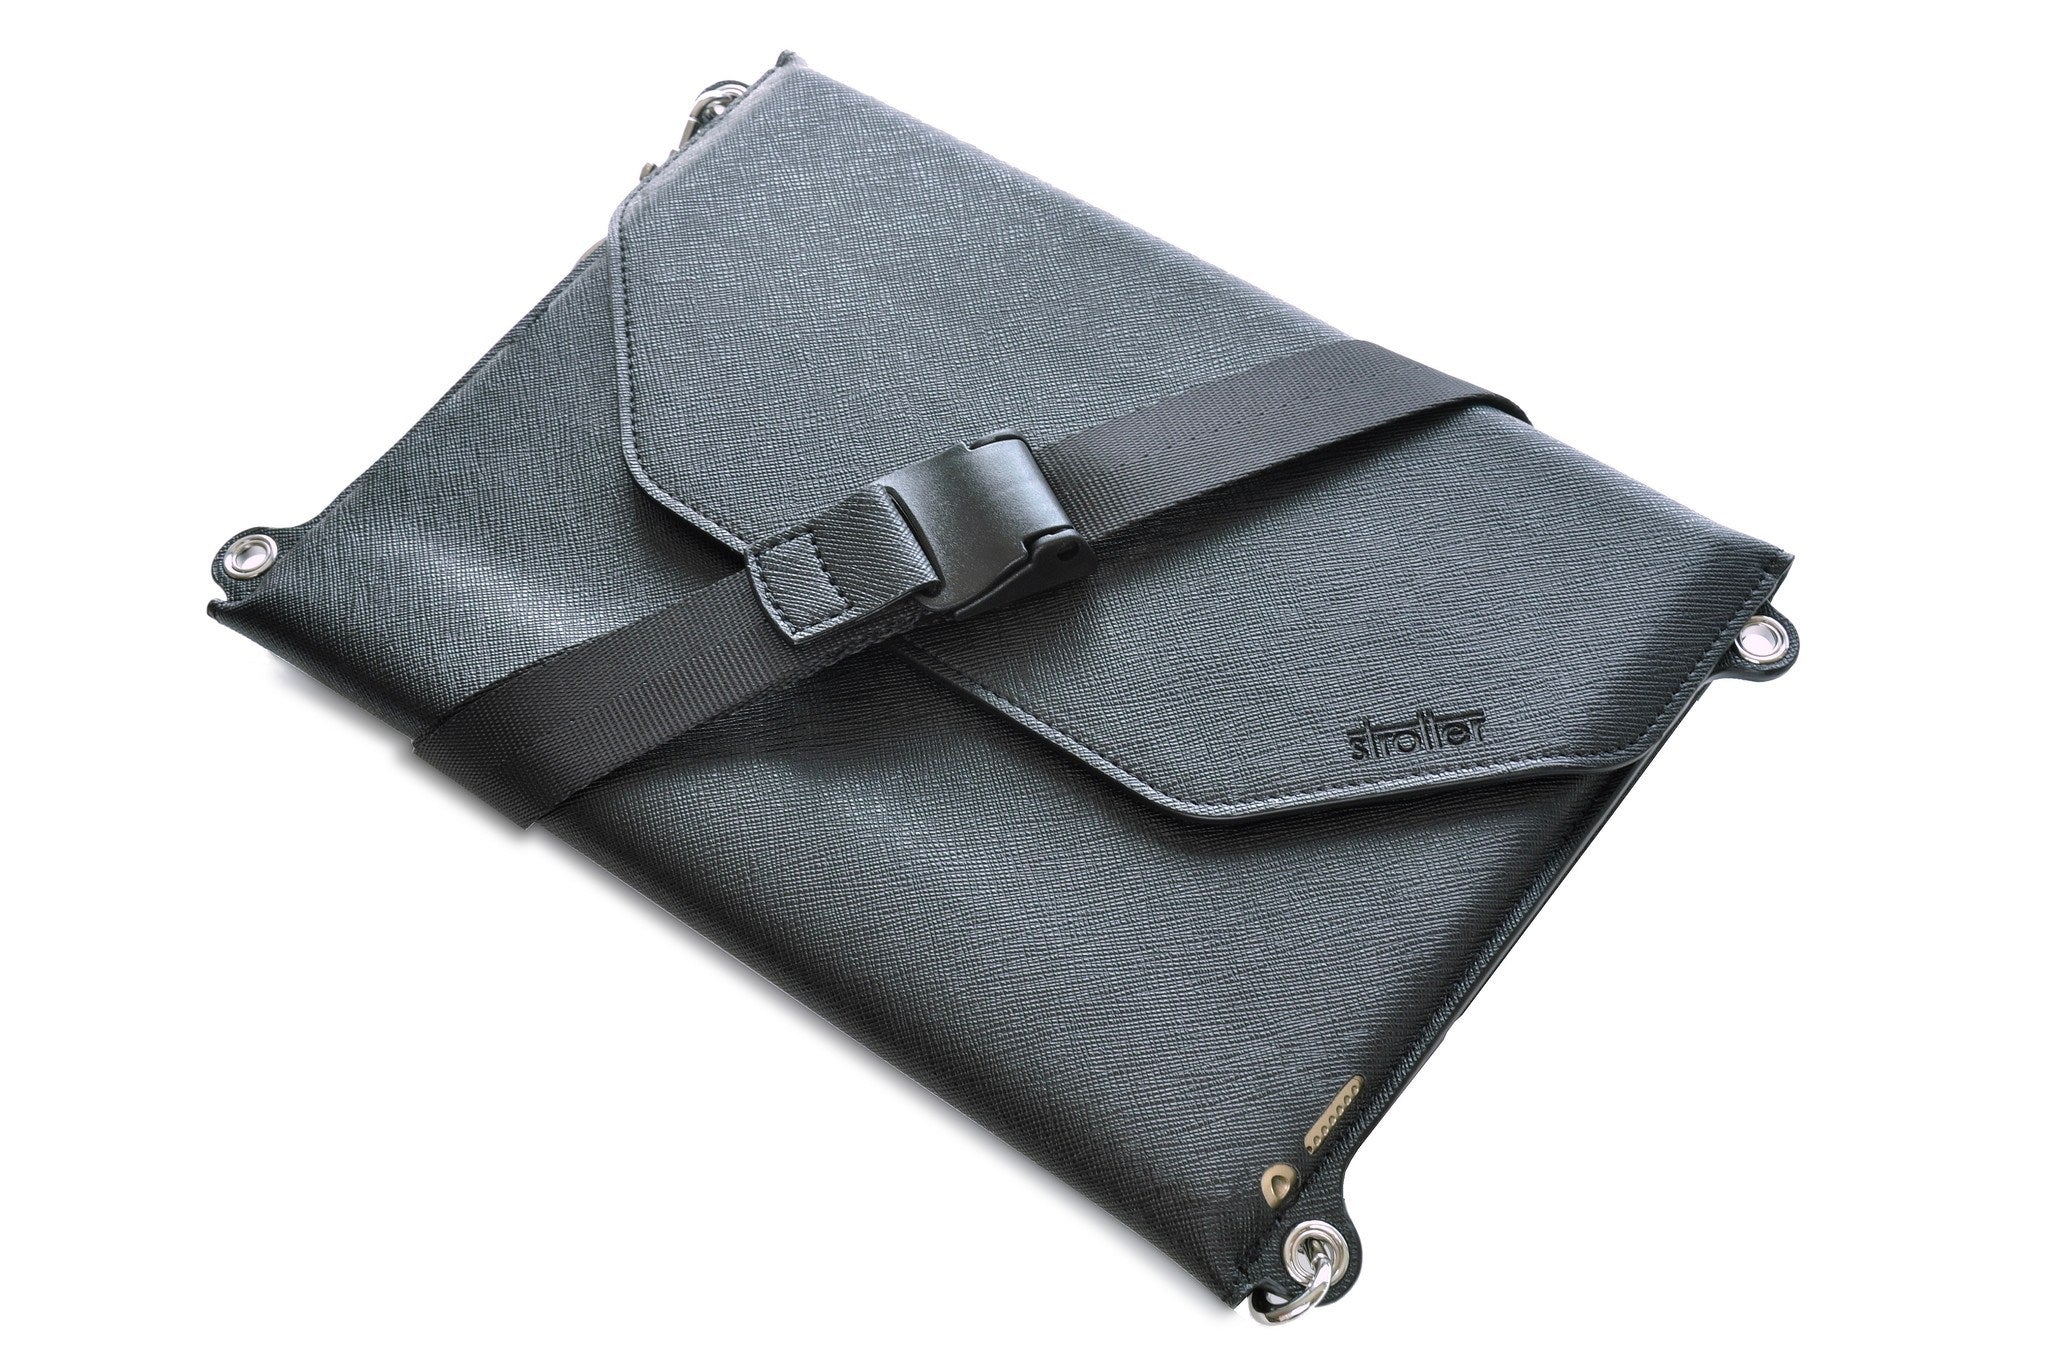 Synthetic leather carrying case with shoulder strap for iPad Air